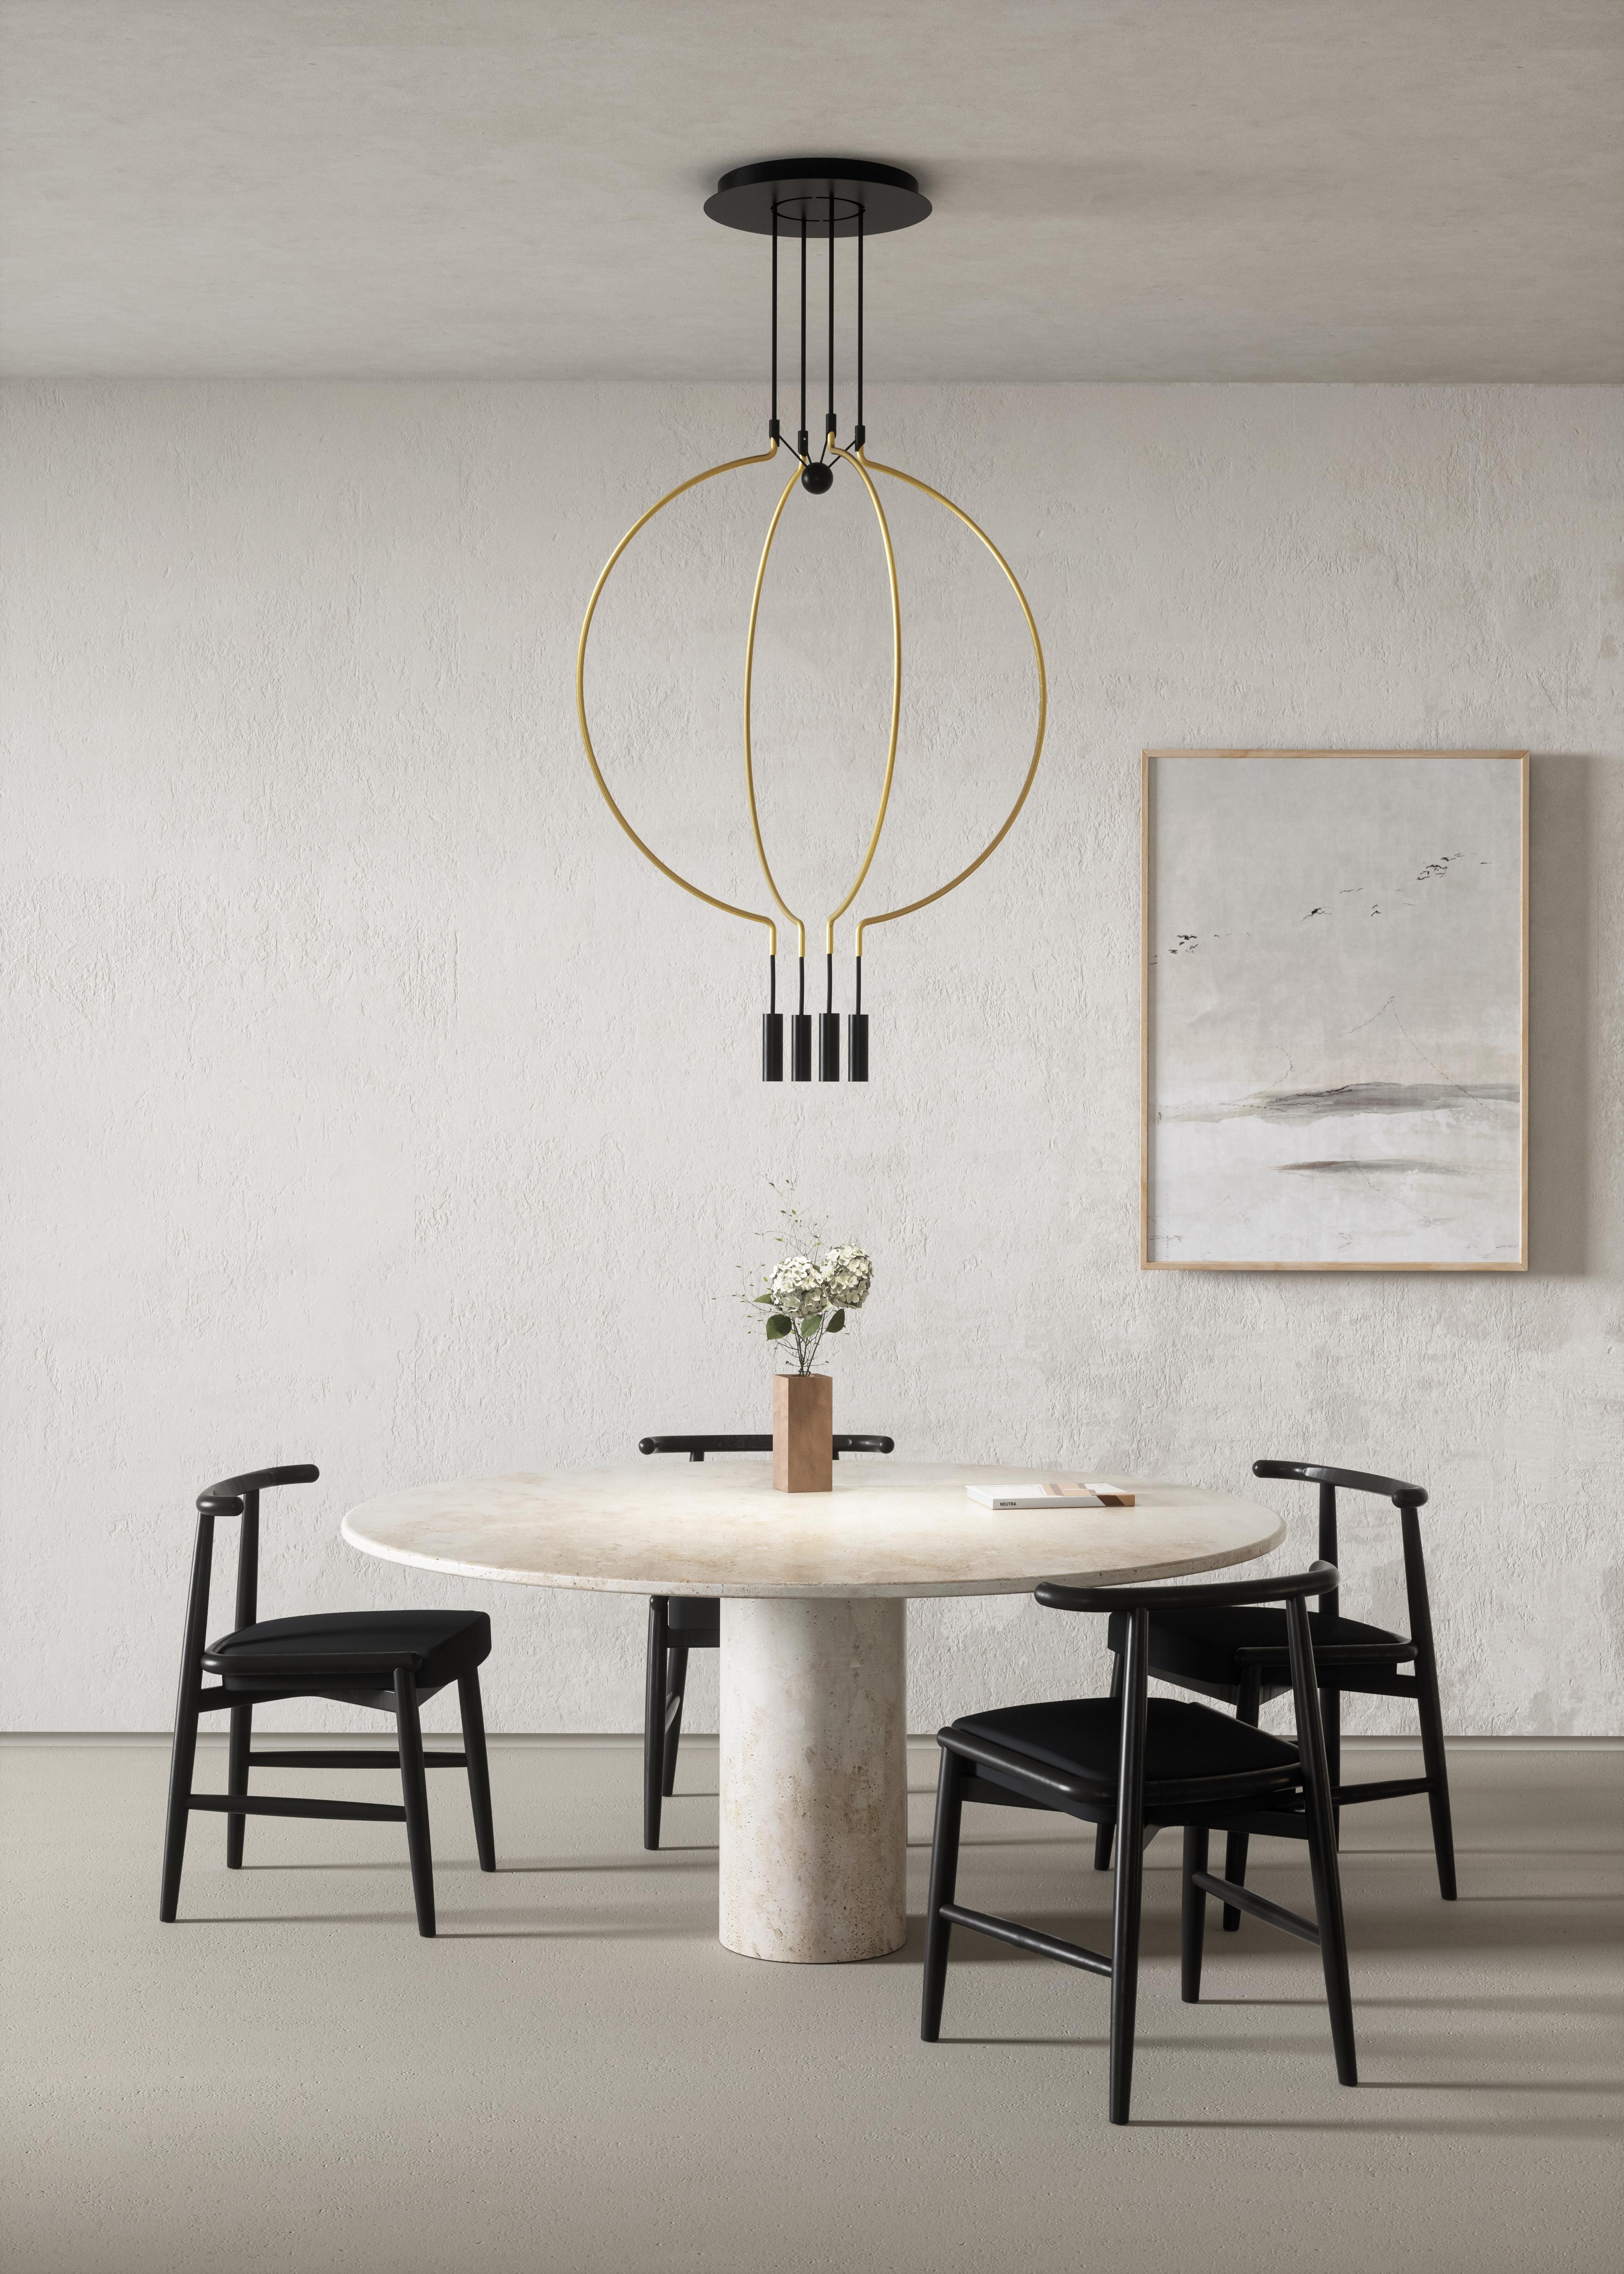 Axolight Liaison Model M2 Pendant Lamp in Black/Black by Sara Moroni

Modular lightness and elegance. Liaison tells about the perfect balance of three geometric archetypes: sphere, circle and cylinder compose a system that includes the single